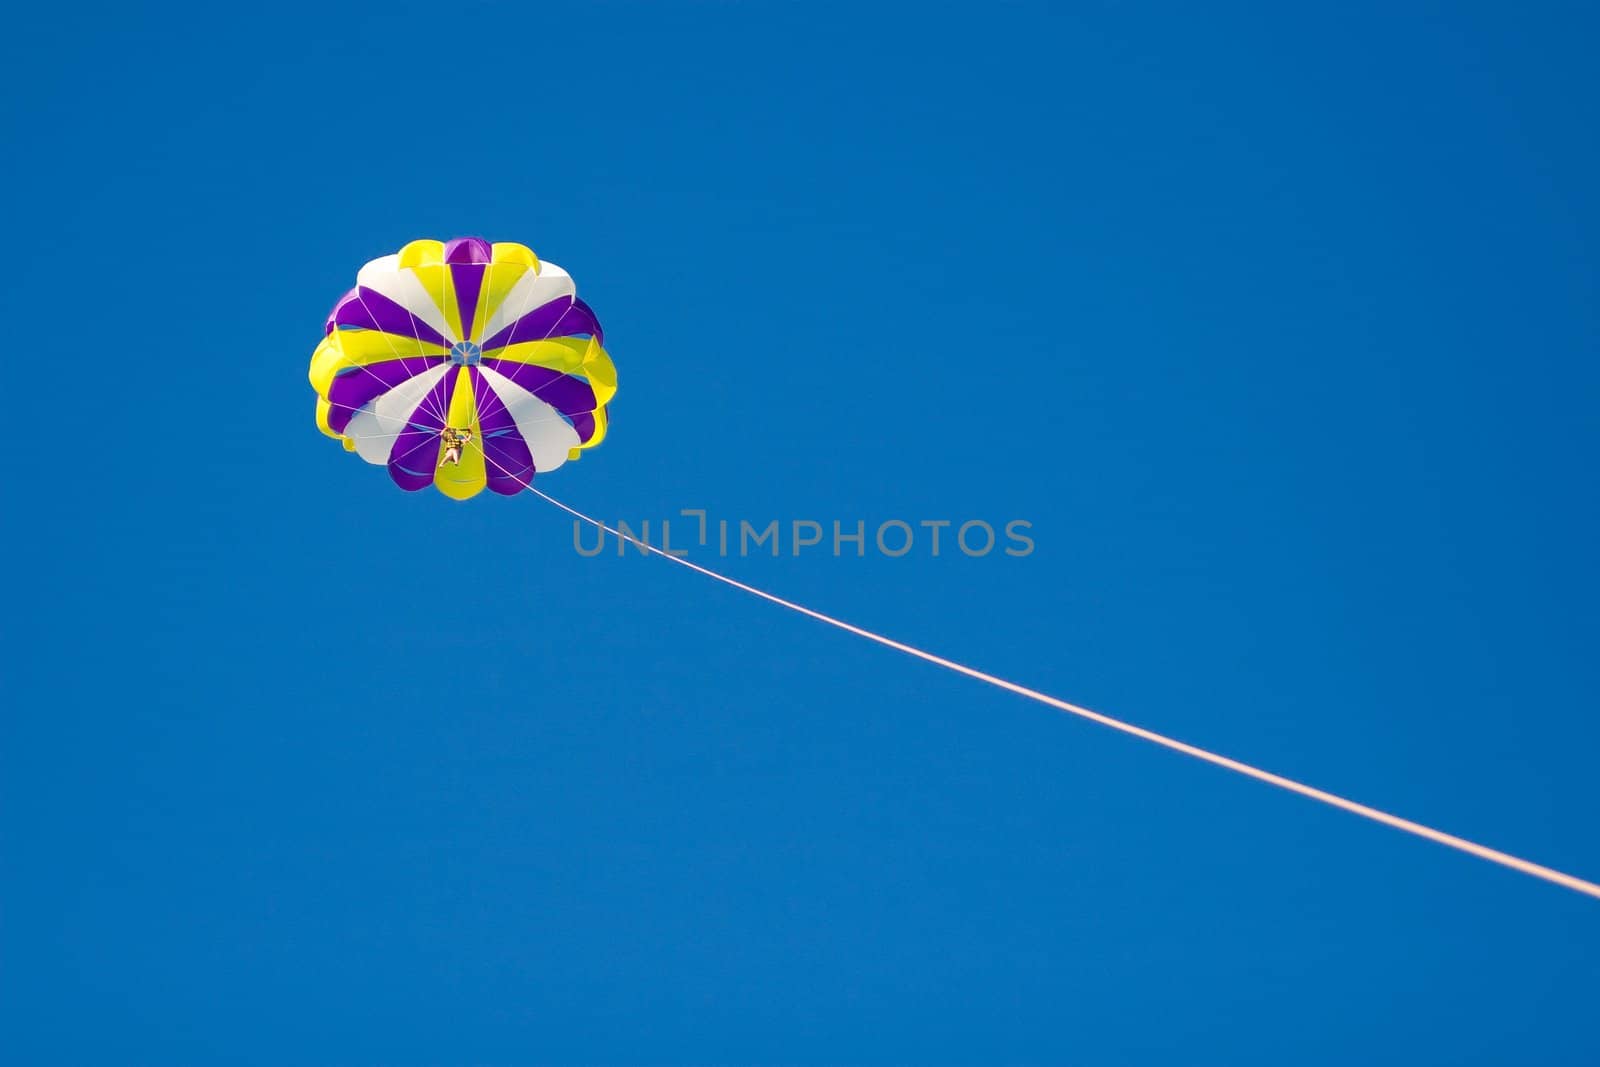 Parachute in the sky tether by cord